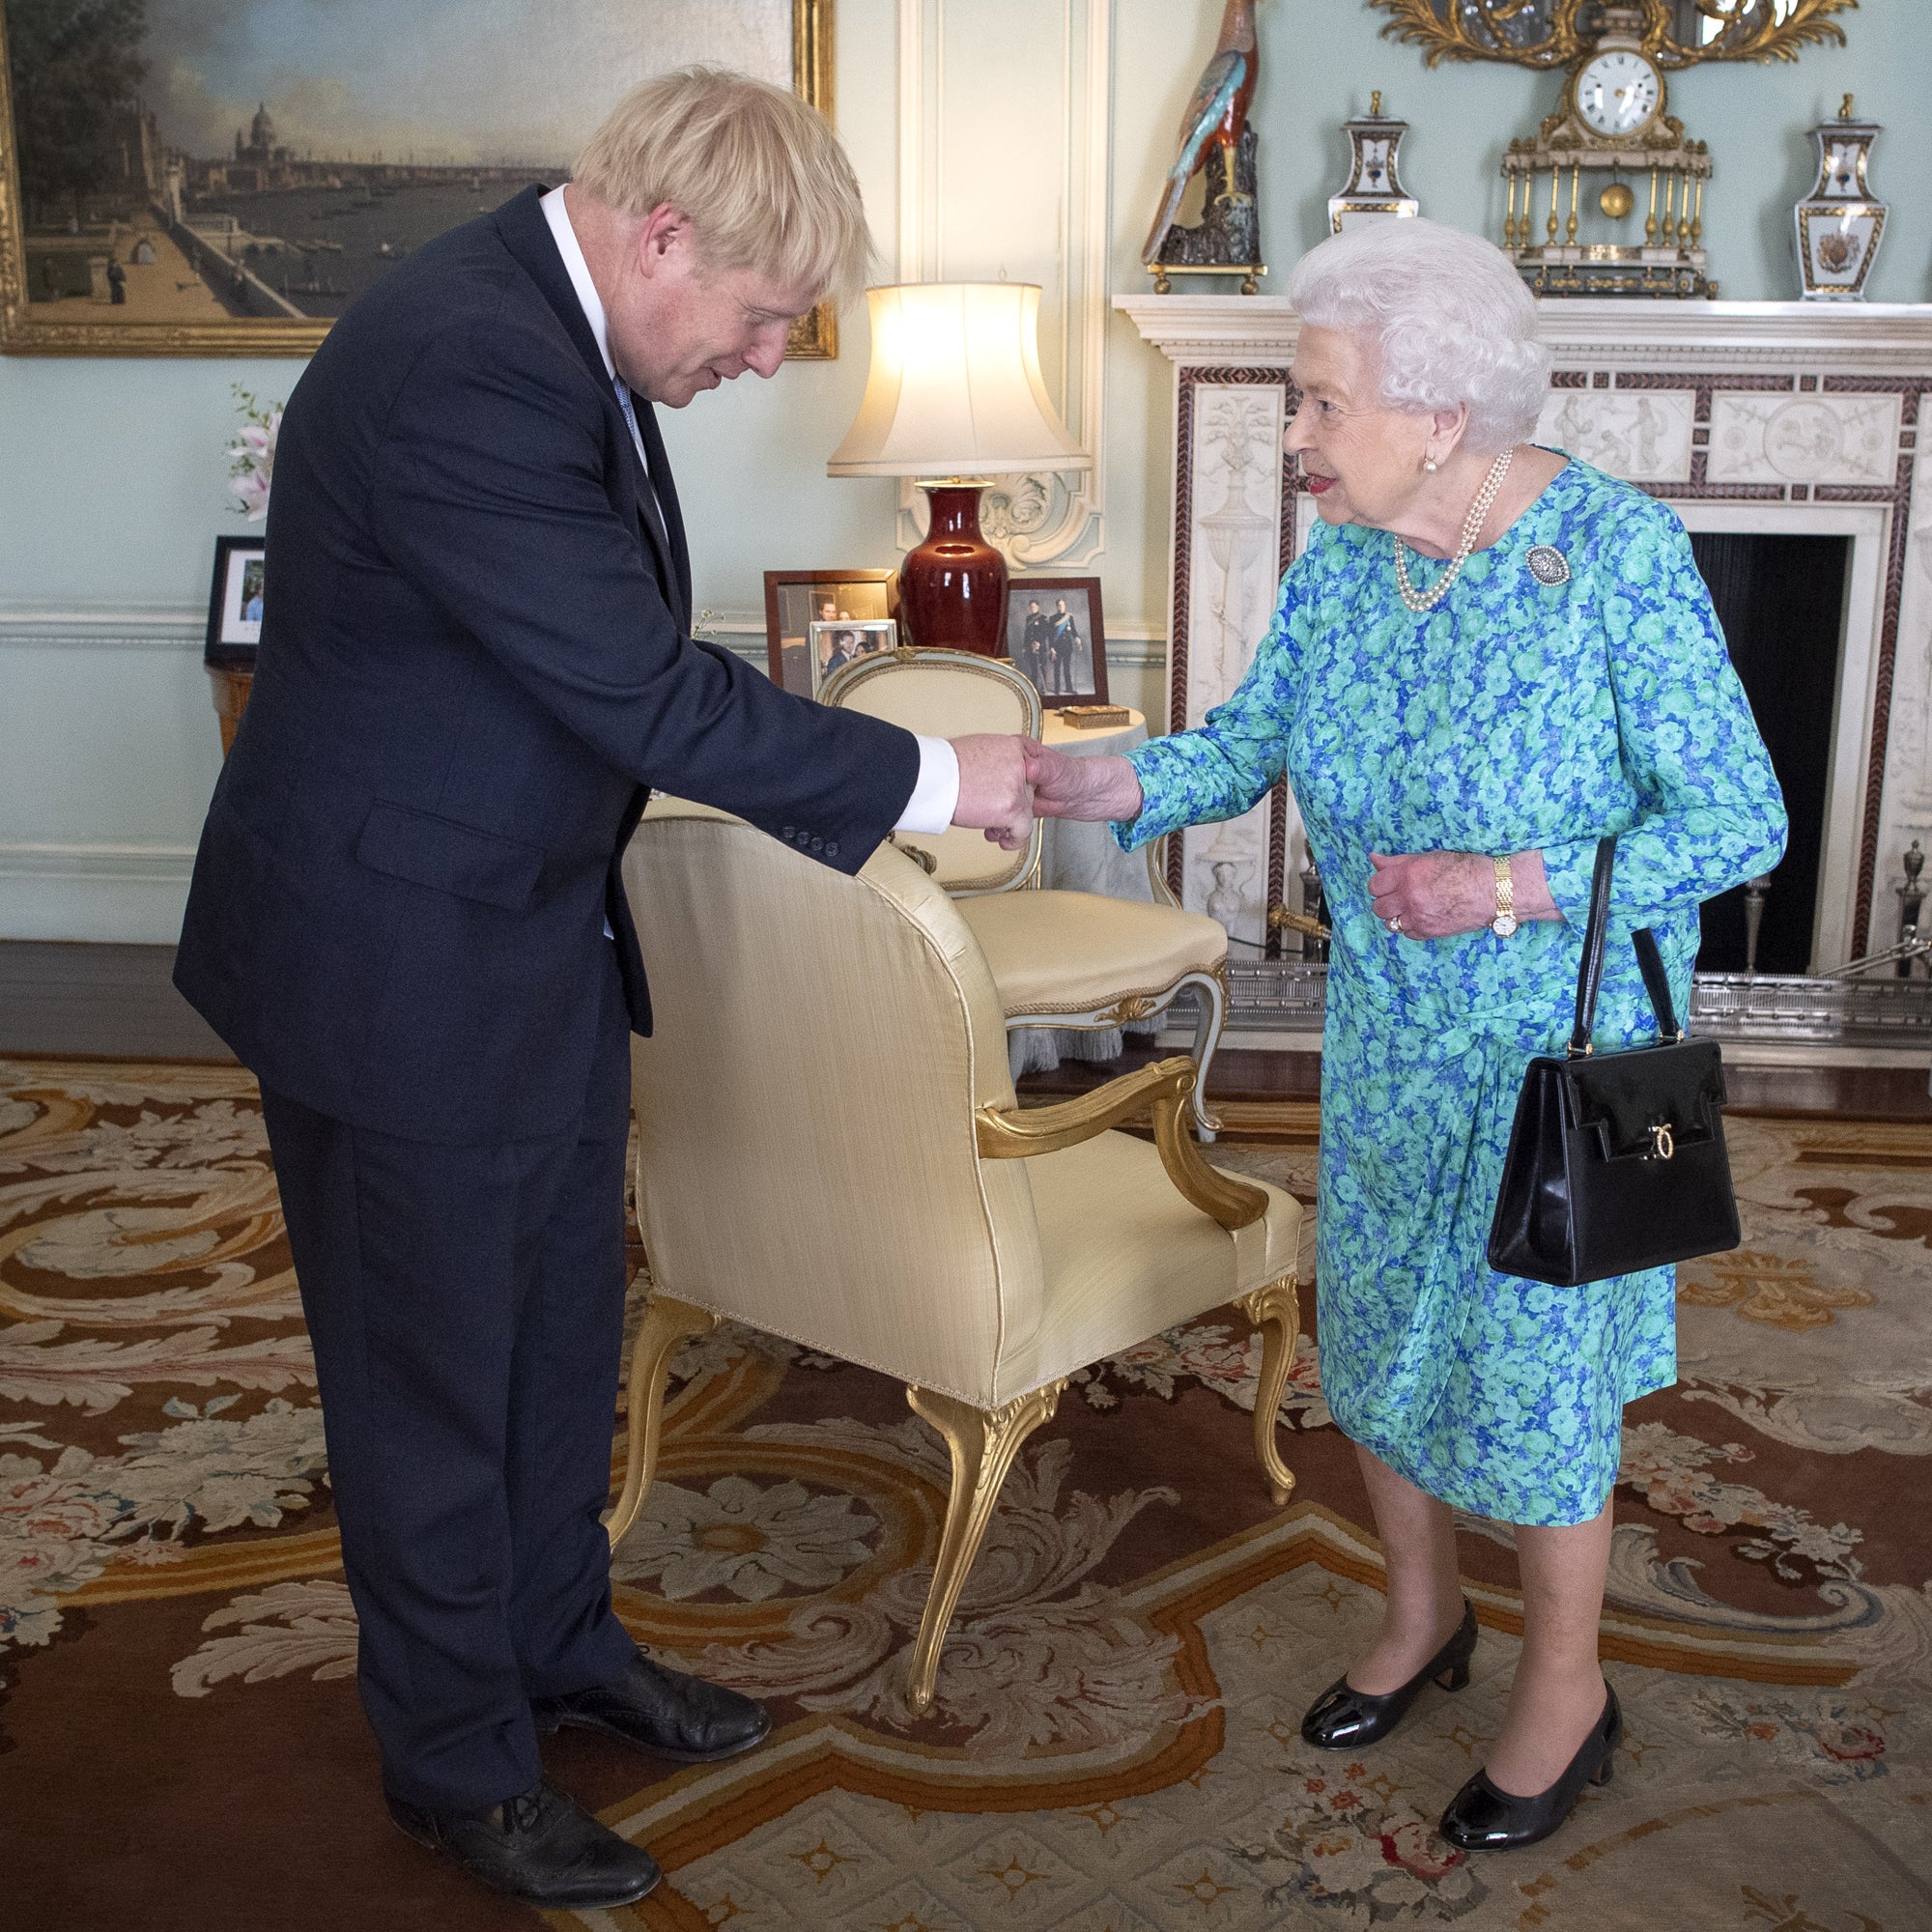 File photo dated 24/7/2019 of Queen Elizabeth II welcoming the newly-elected leader of the Conservative party Boris Johnson during an audience in Buckingham Palace, London. (Victoria Jones/PA)